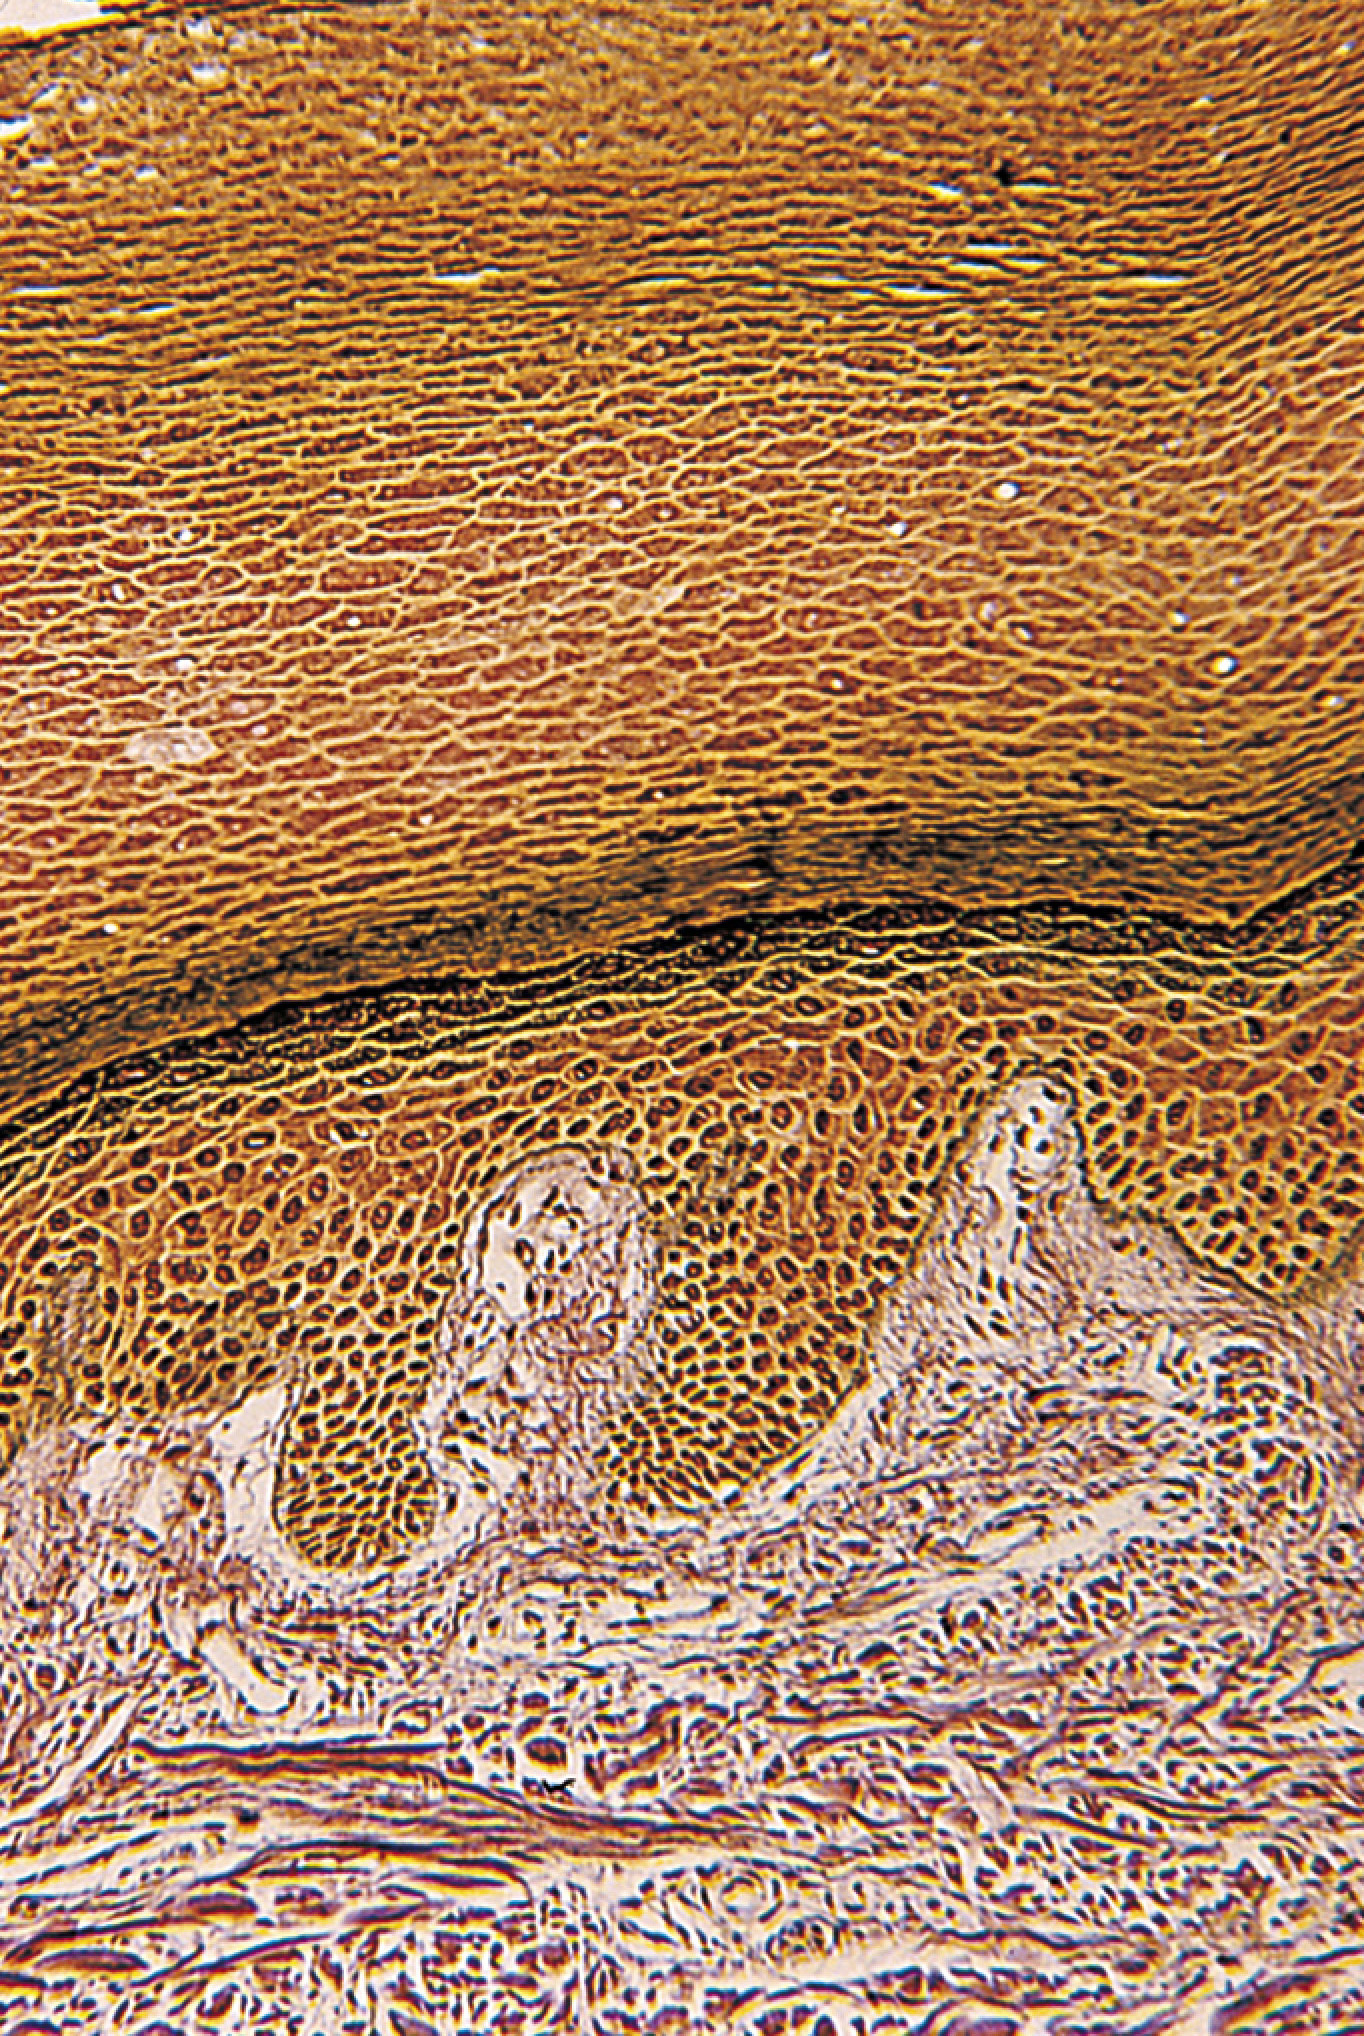 The photo is a cross-section of thickened human skin